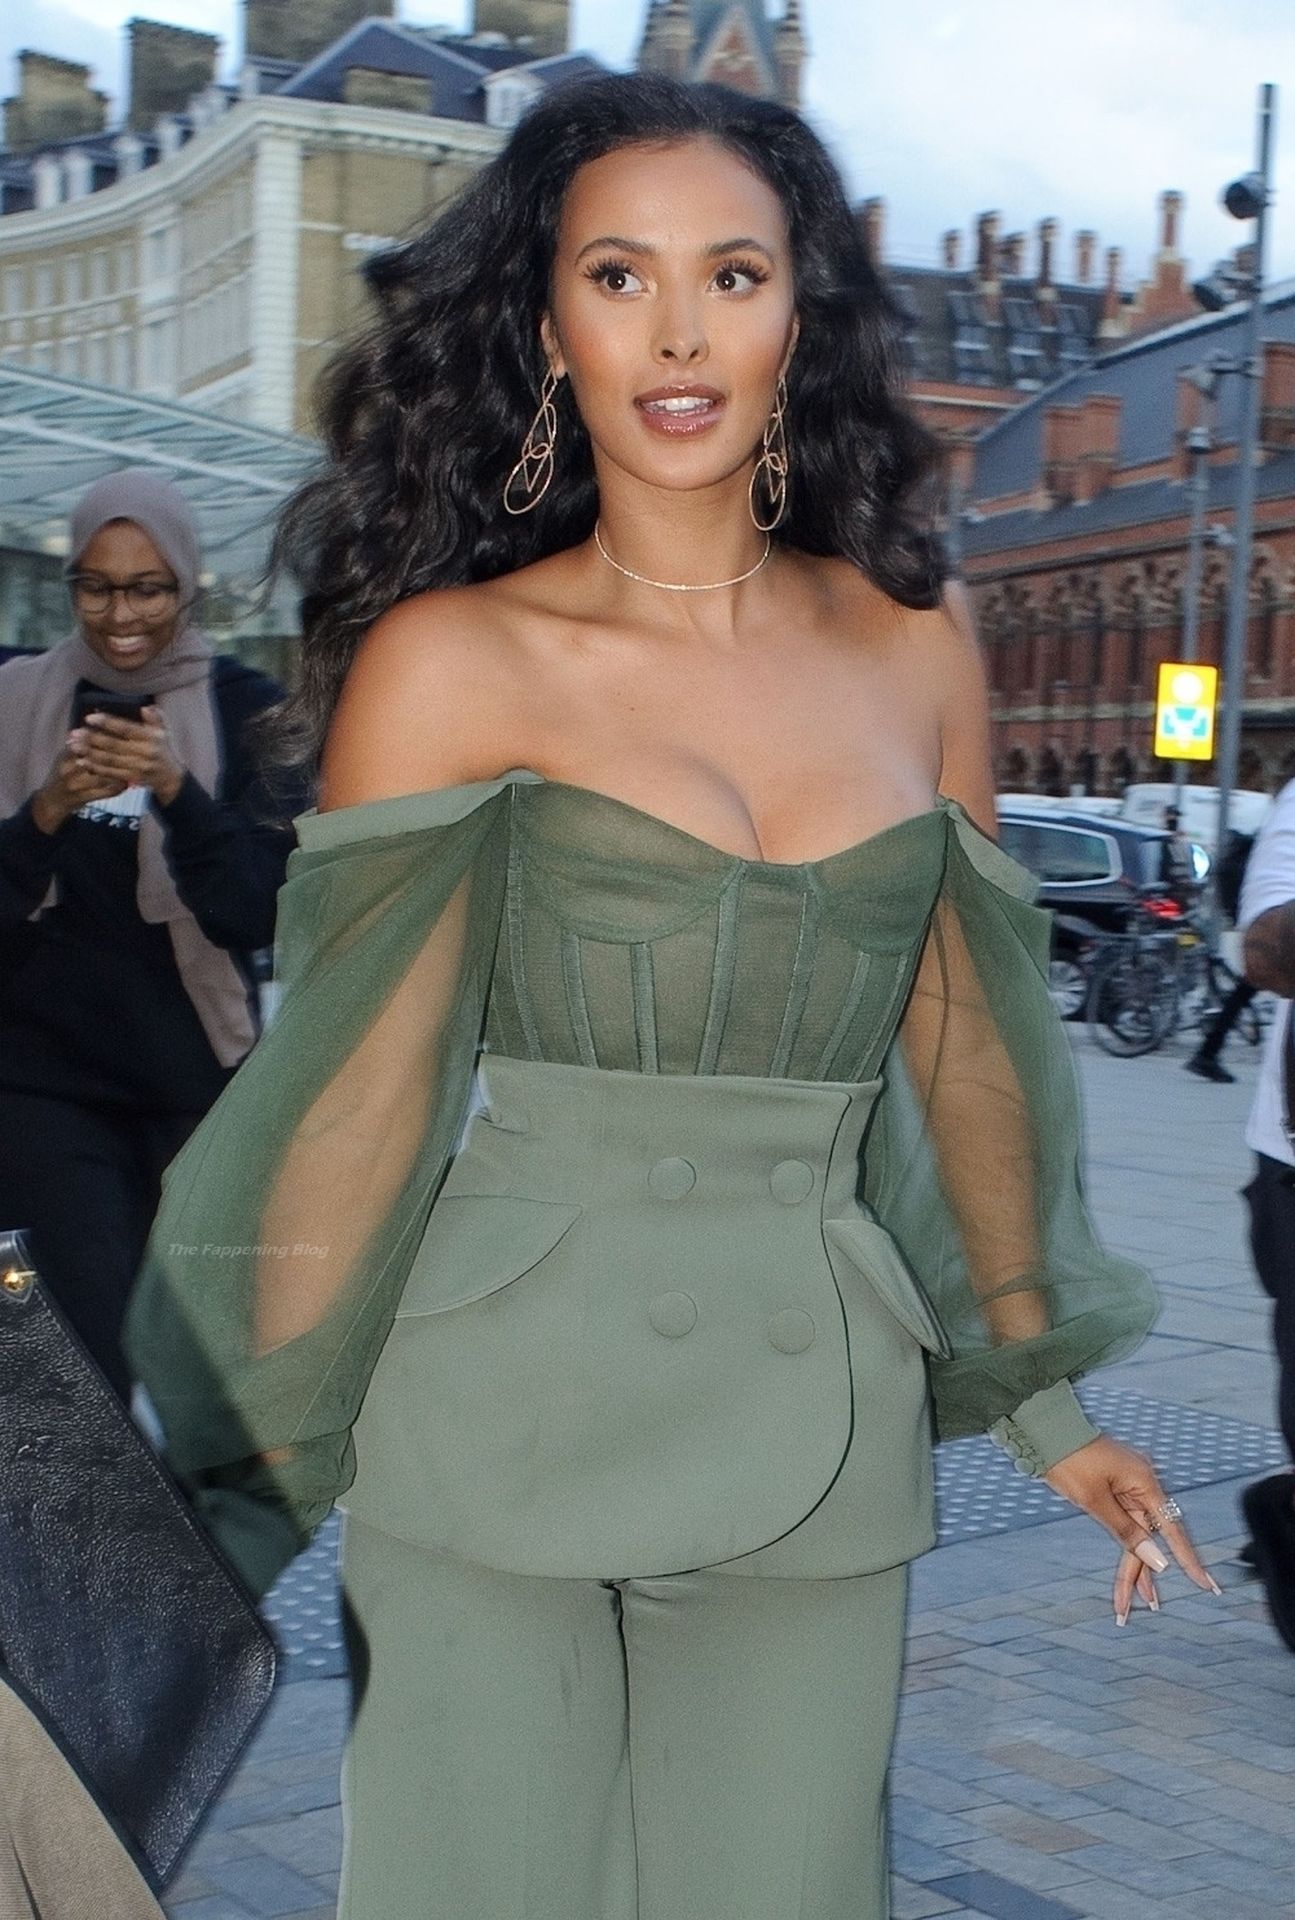 Maya Jama Looks Worse For Wear as She Makes an Incredibly Busty Exit From Sports Launch (109 Photos)